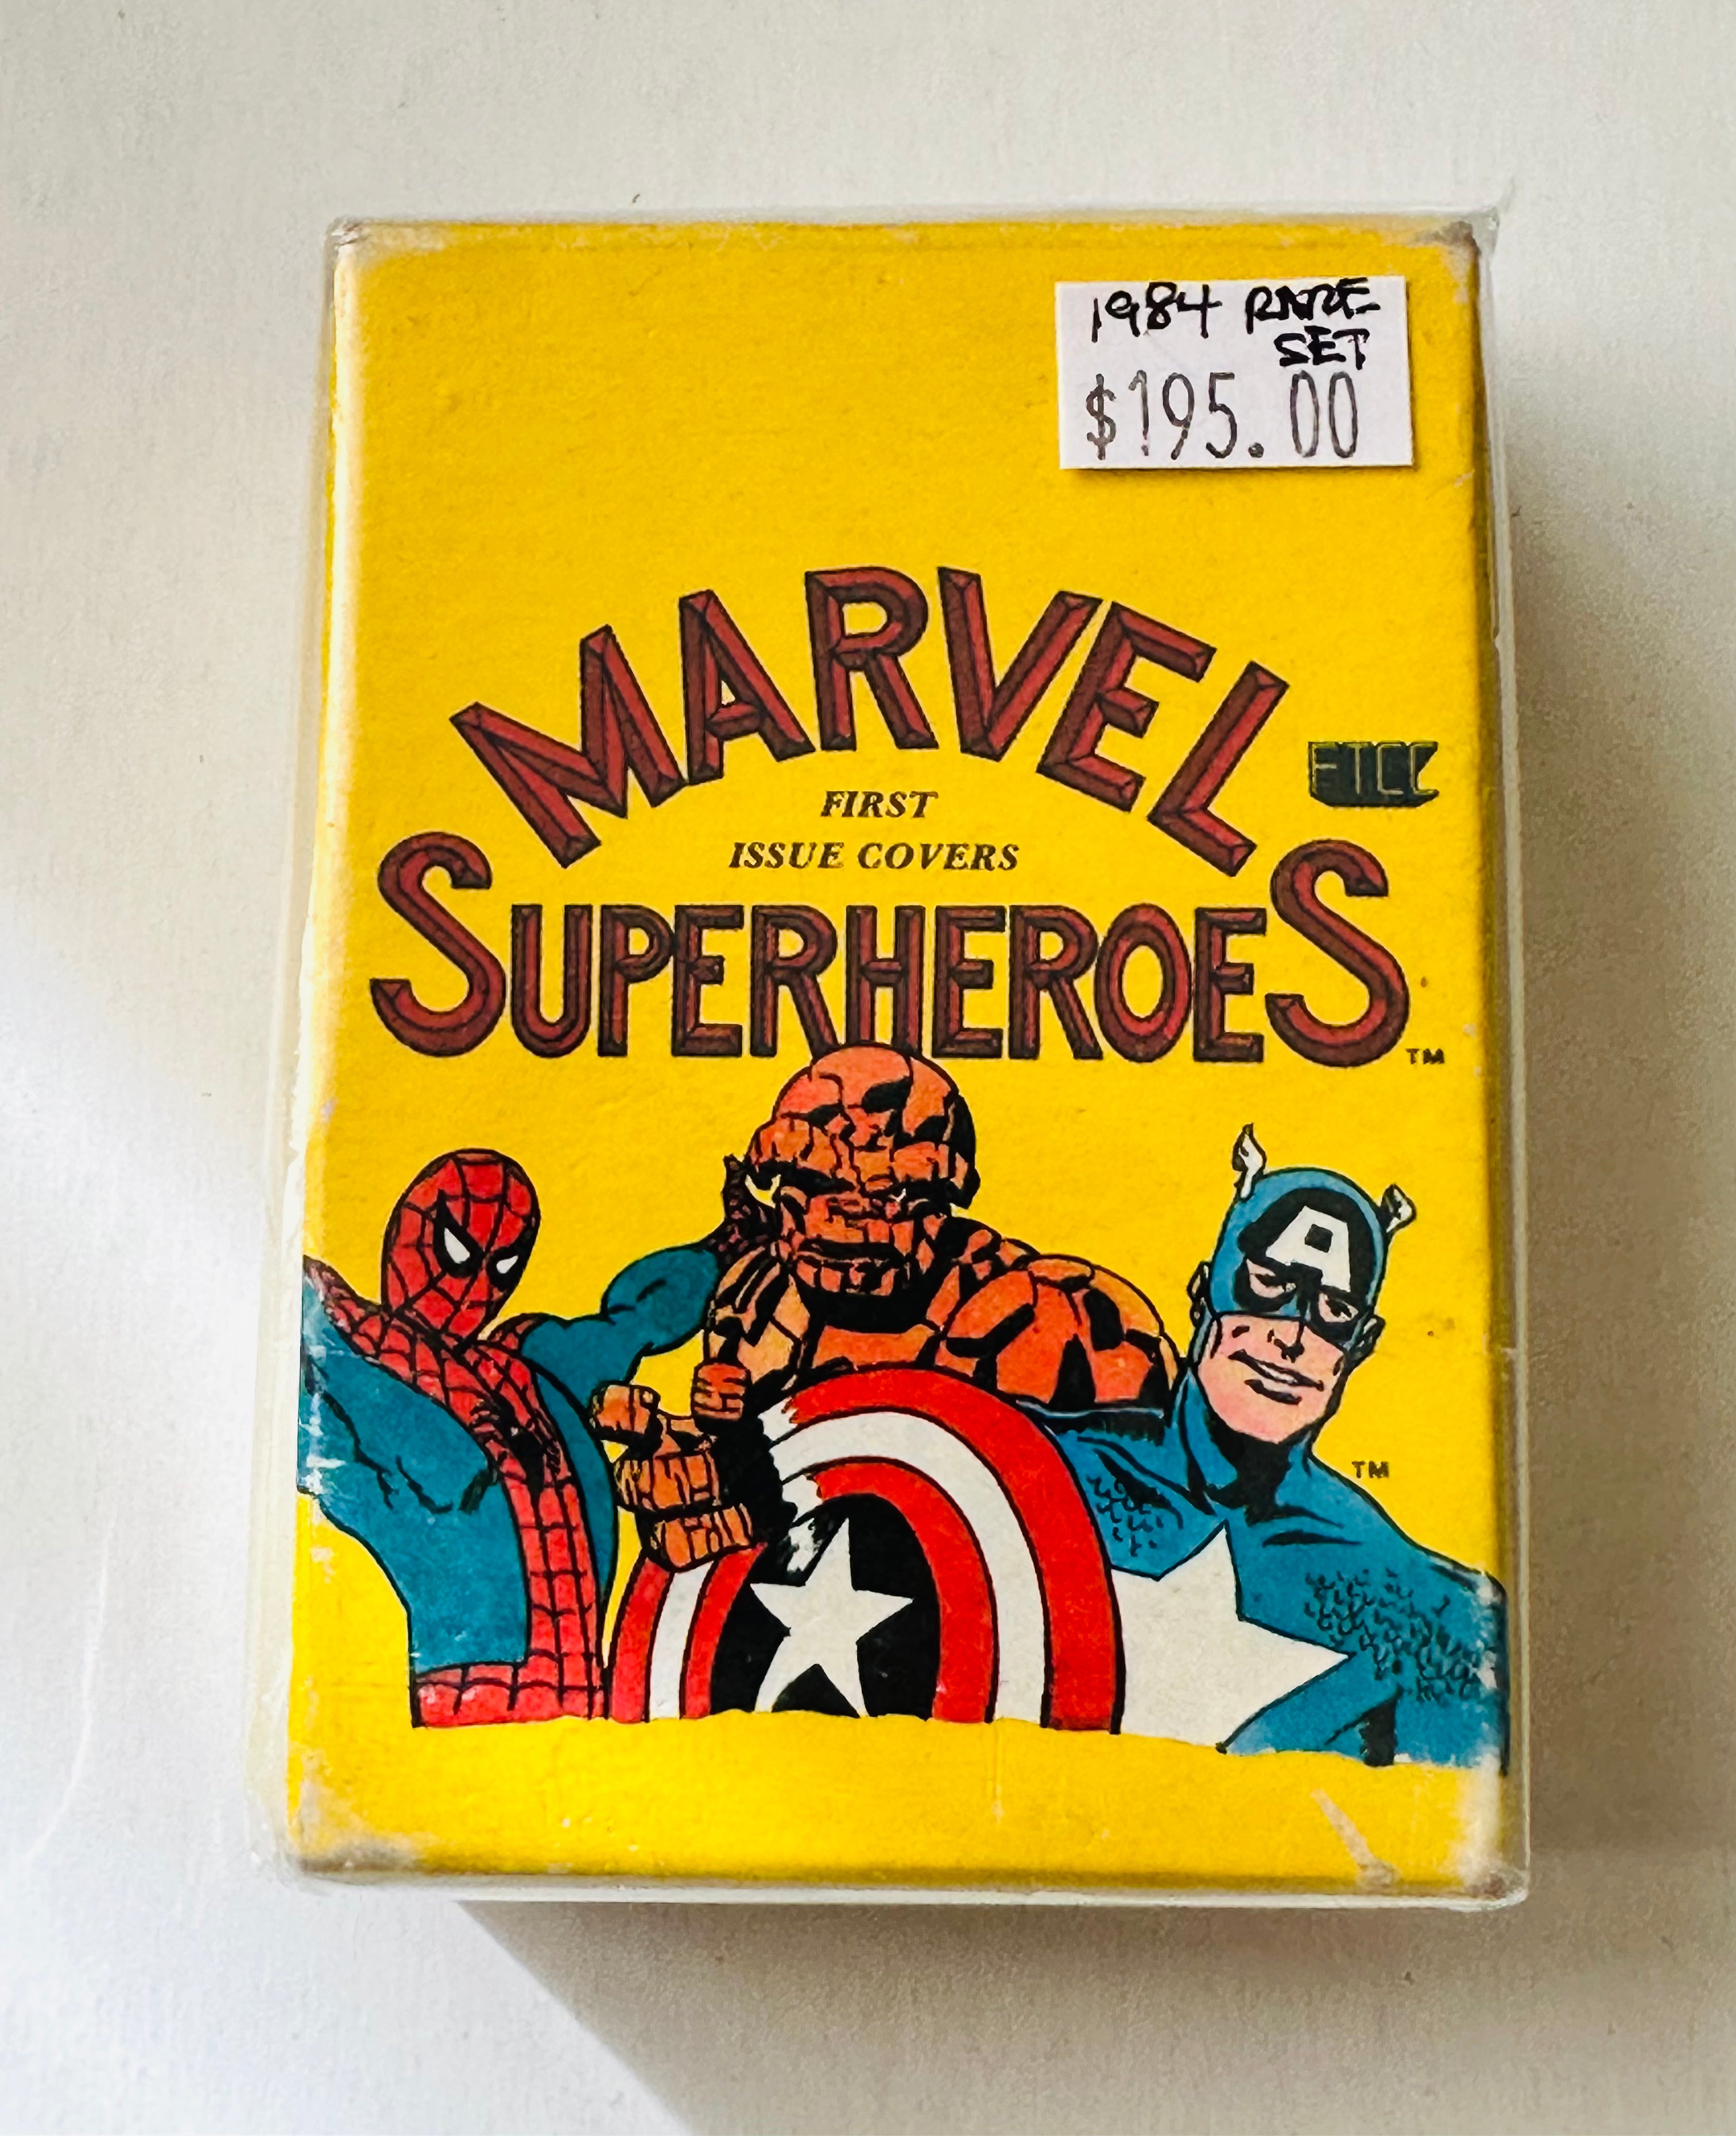 Marvel Superheroes First issue covers rare box cards set 1984